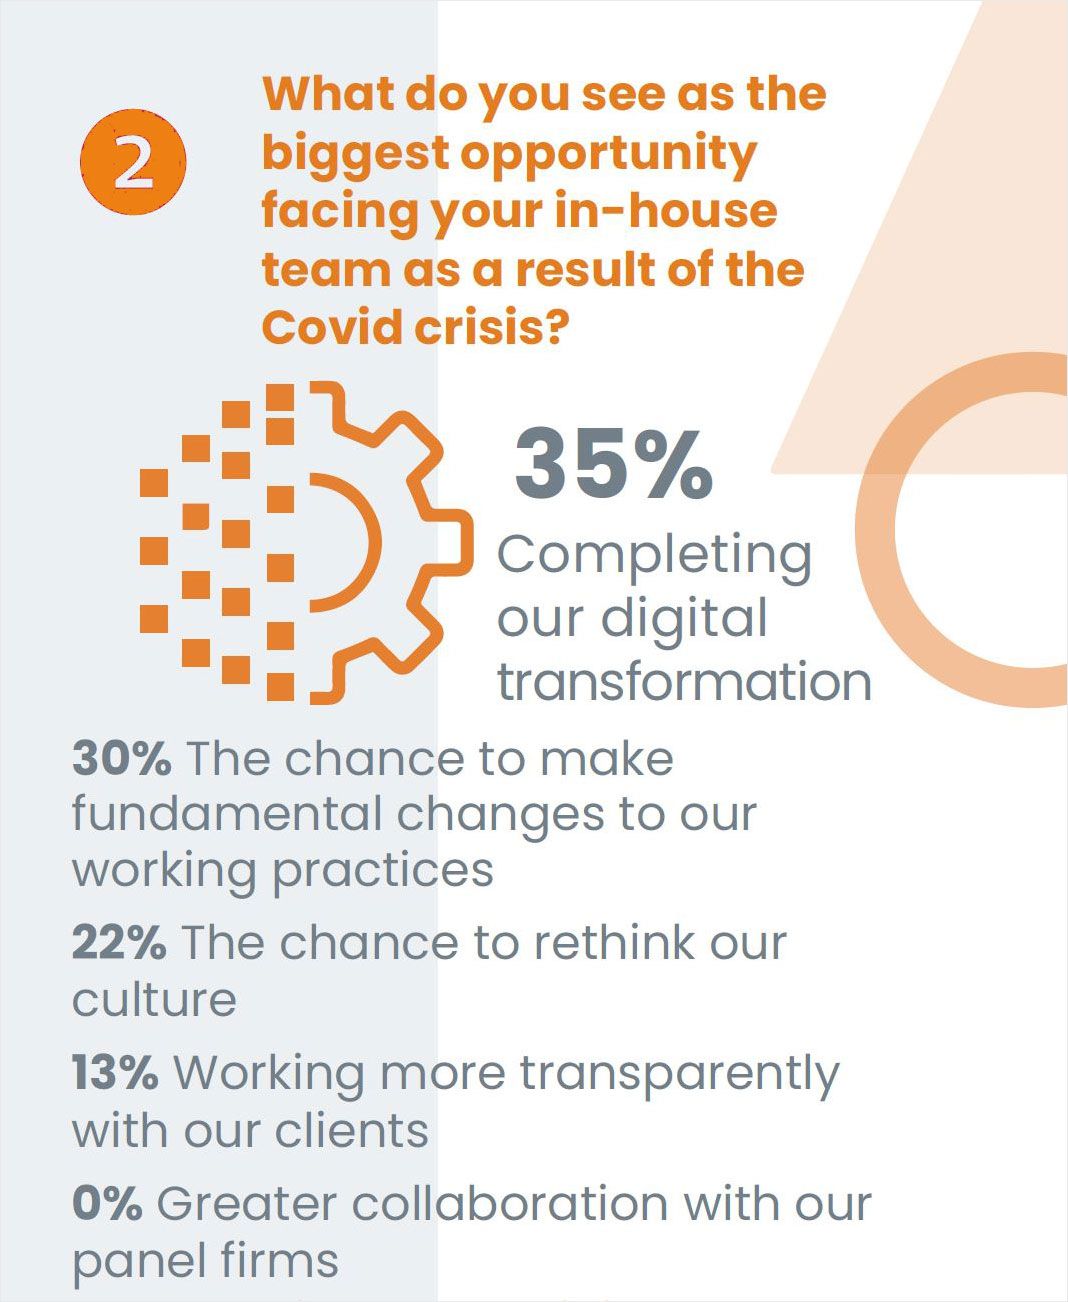 What in-house legal teams' see as the biggest opportunity they face as a result of COVID-19